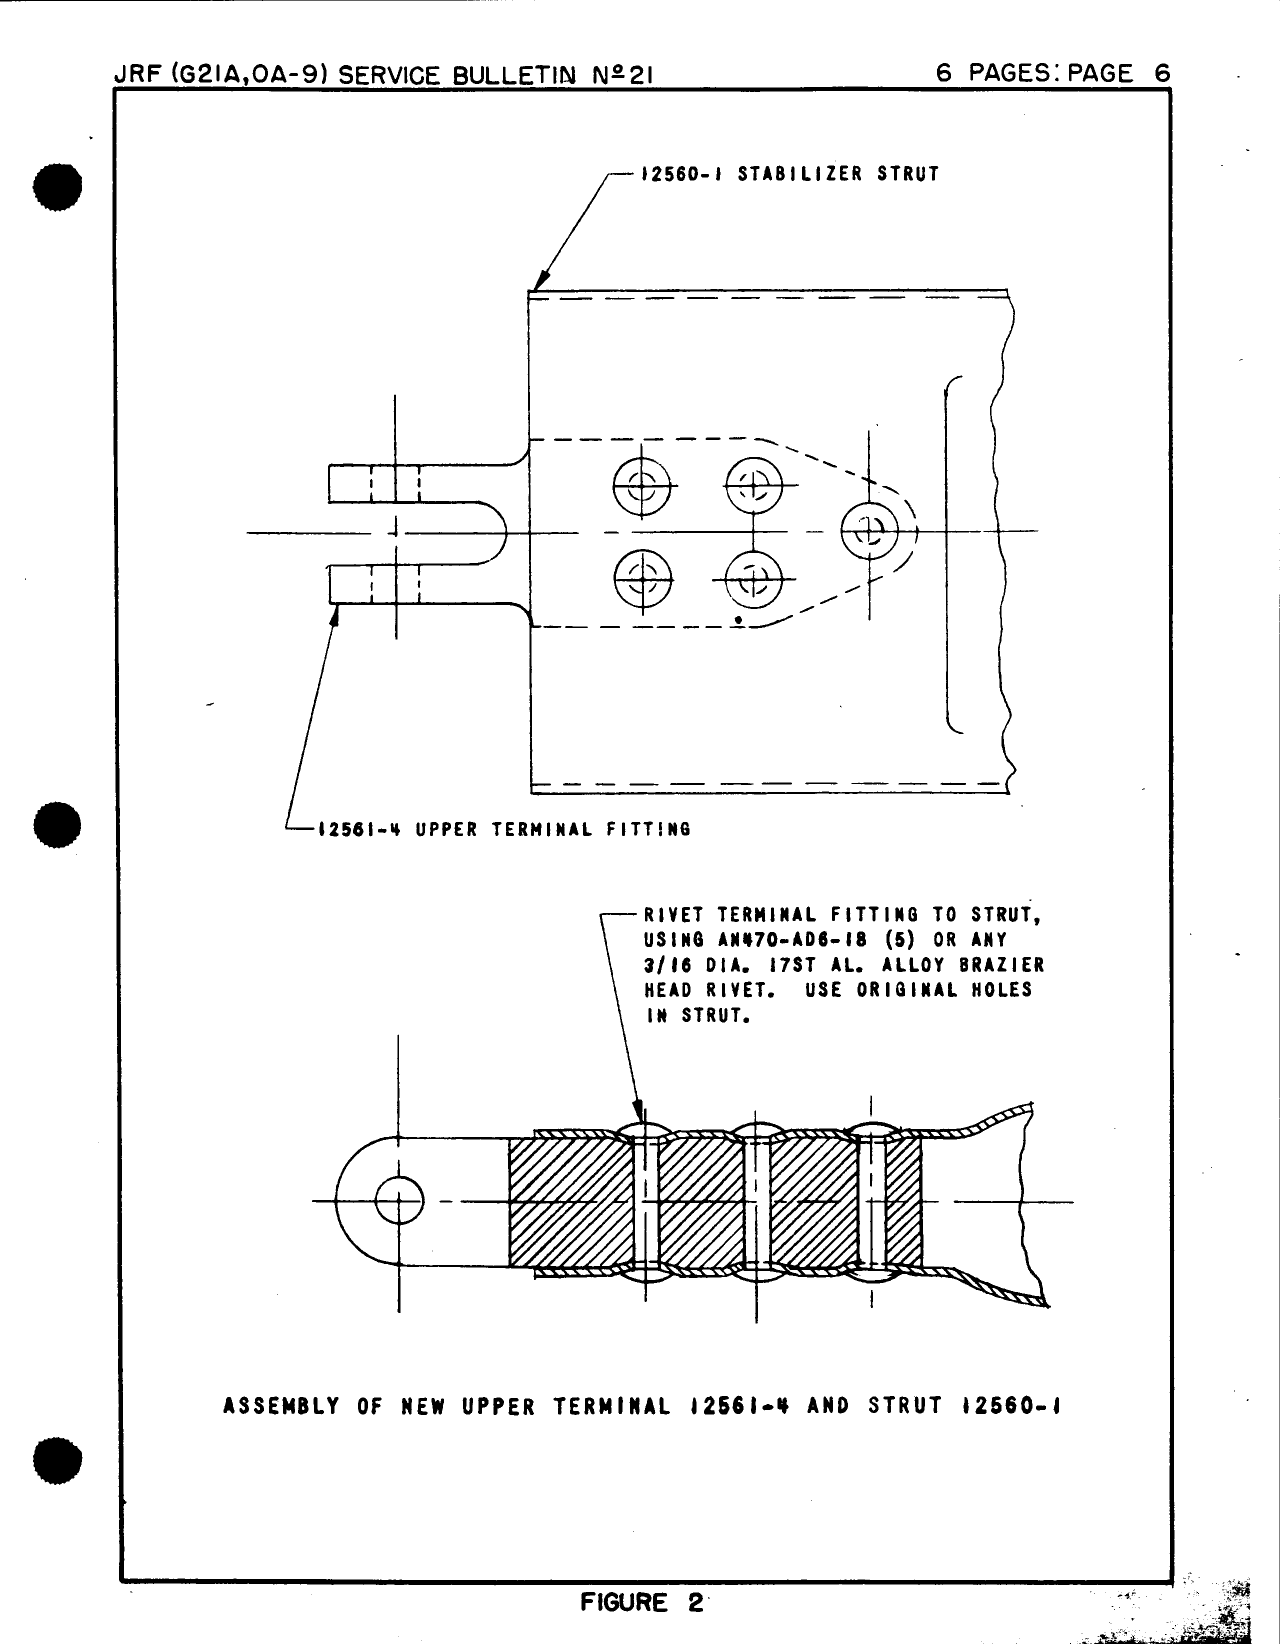 Sample page 7 from AirCorps Library document: Inspection and Replacement of Tail Upper Terminal Stabilizer Struts for Model JRF, G-21A, and OA-9